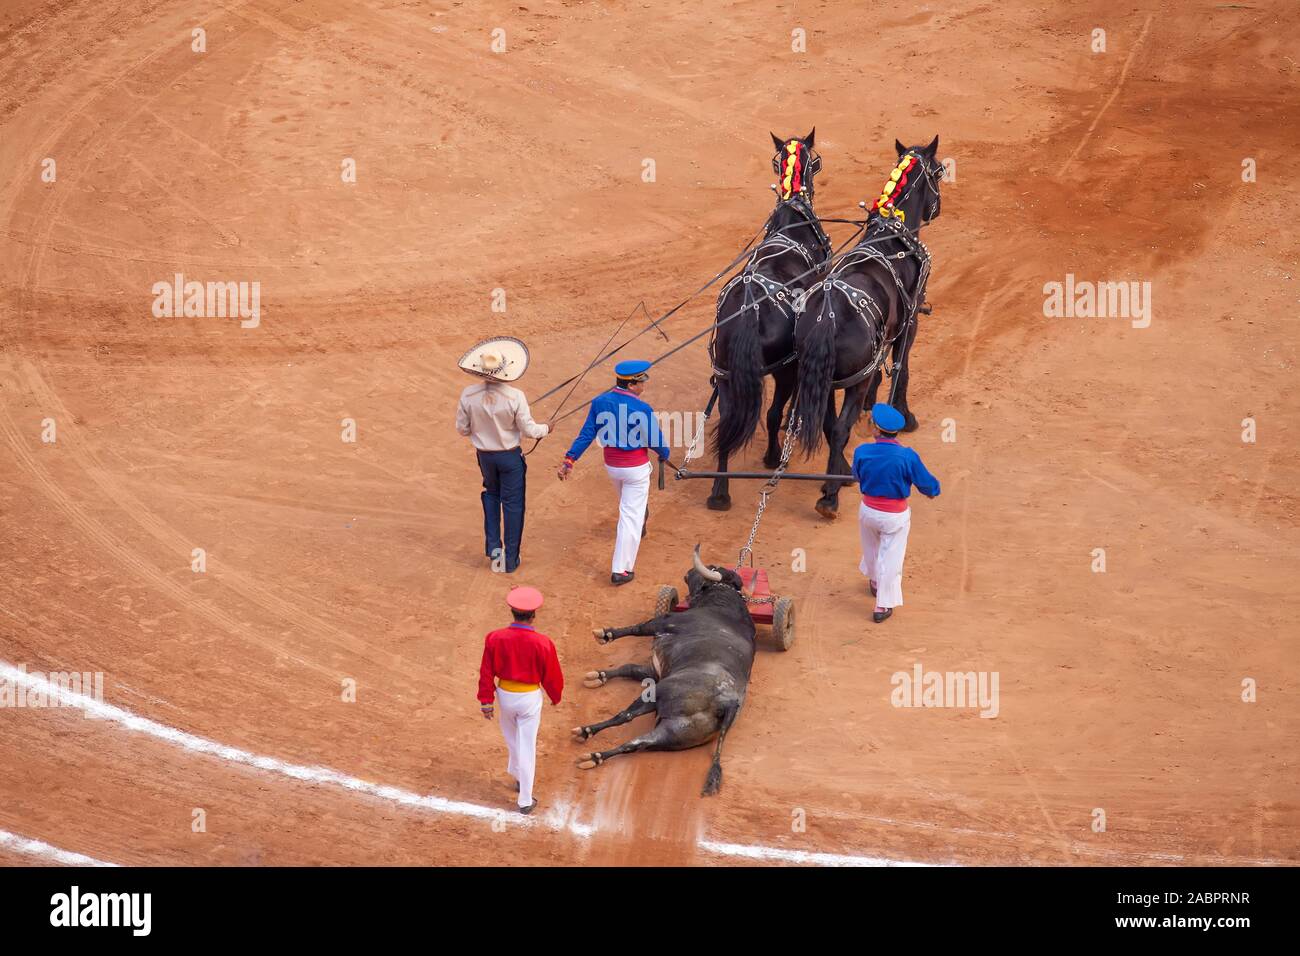 Dead bull removed from bullring in Mexico City Stock Photo